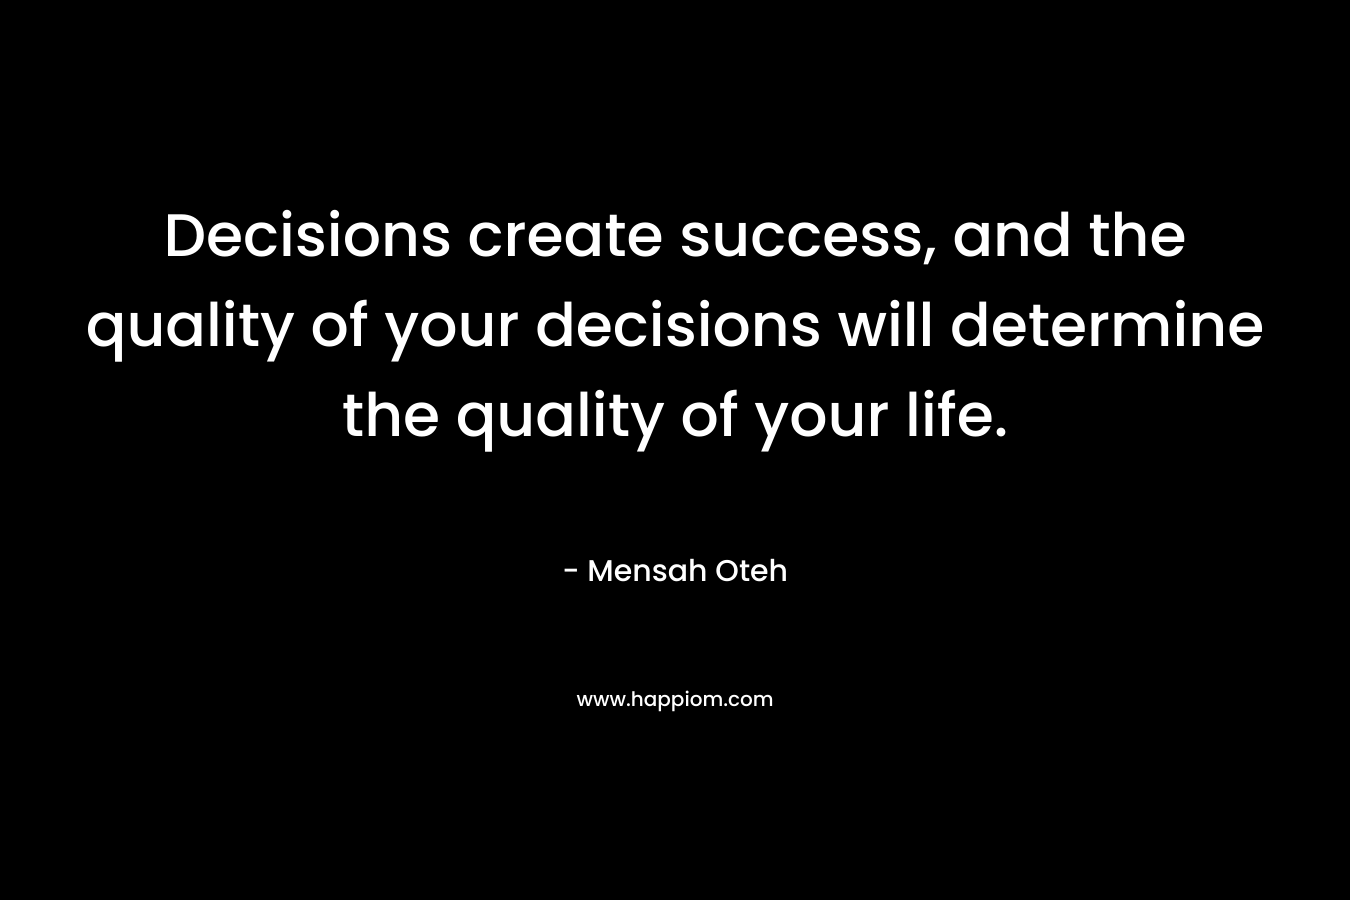 Decisions create success, and the quality of your decisions will determine the quality of your life.